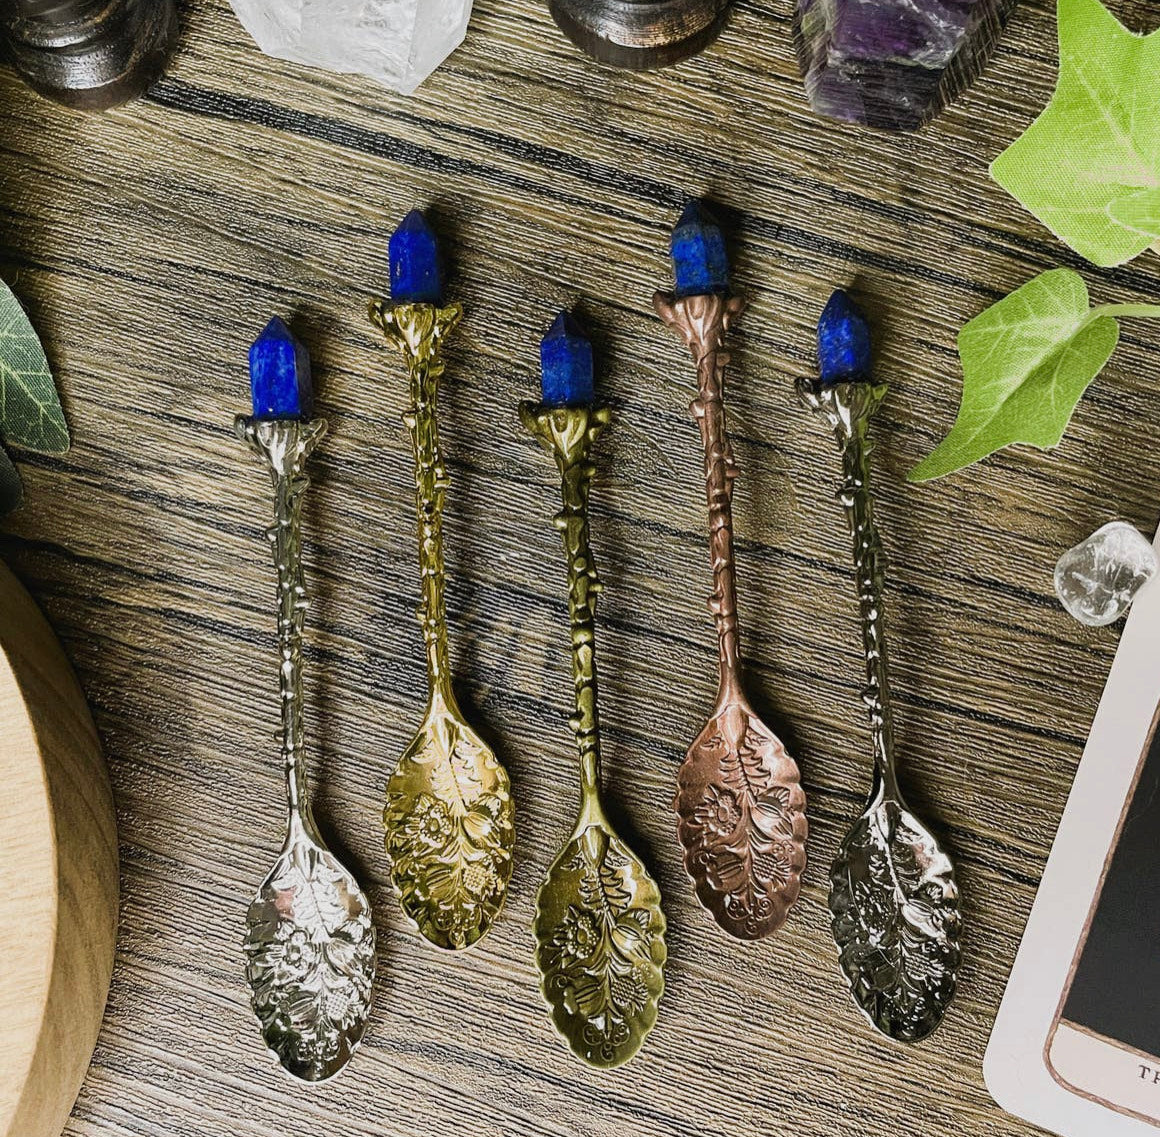 Lapis Crystal Herb Spoon, Witchcraft Apothecary Supplies